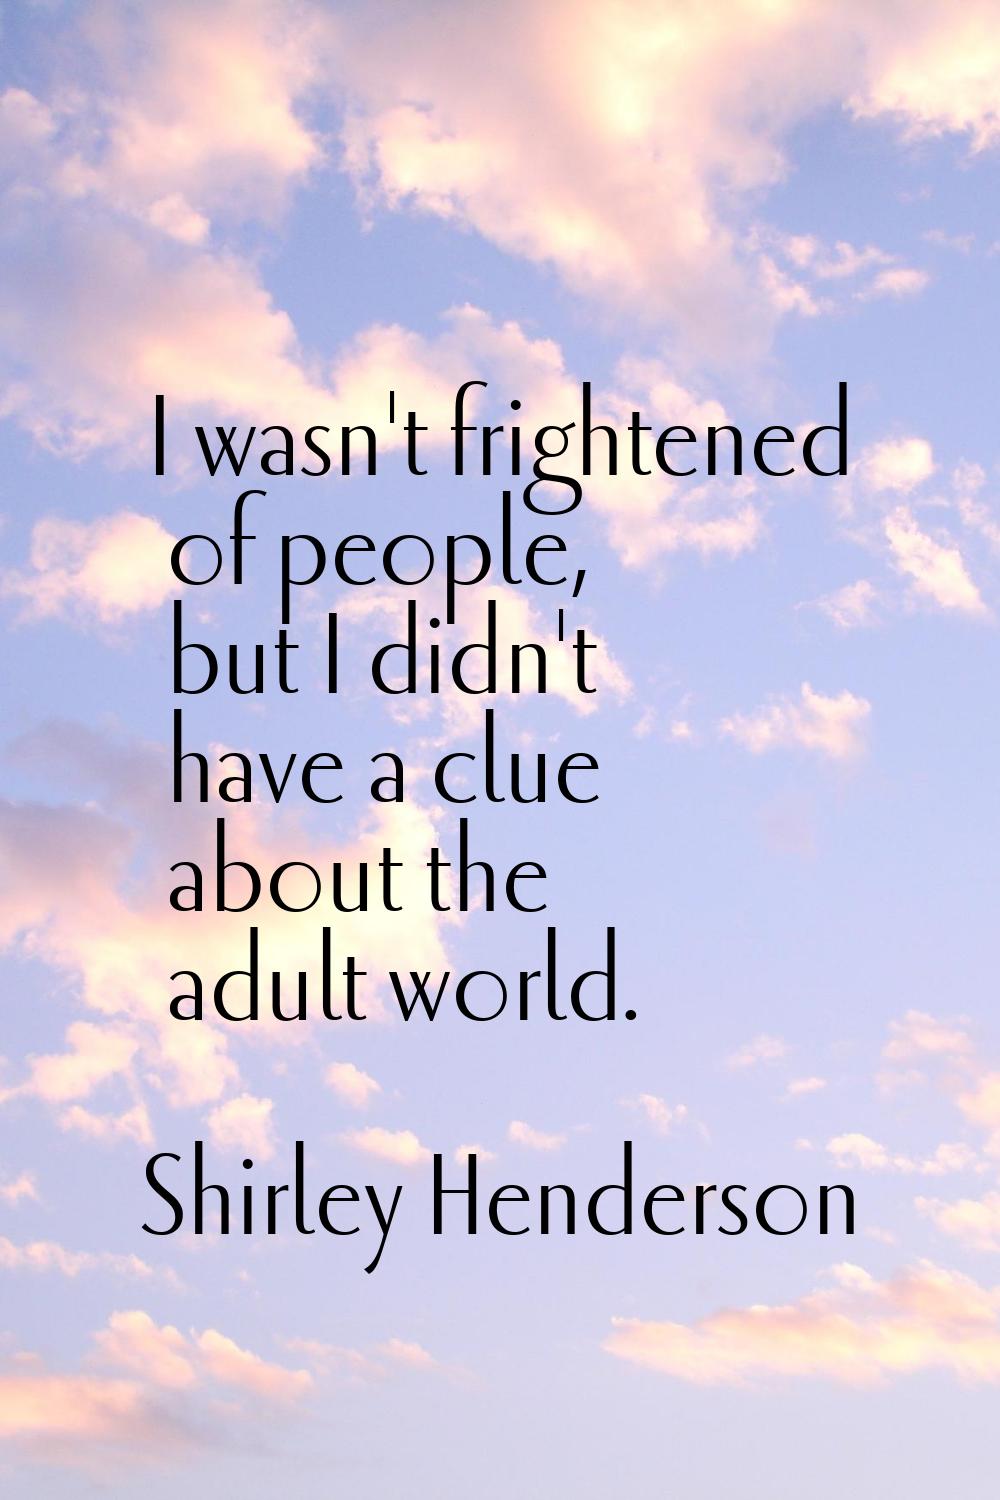 I wasn't frightened of people, but I didn't have a clue about the adult world.